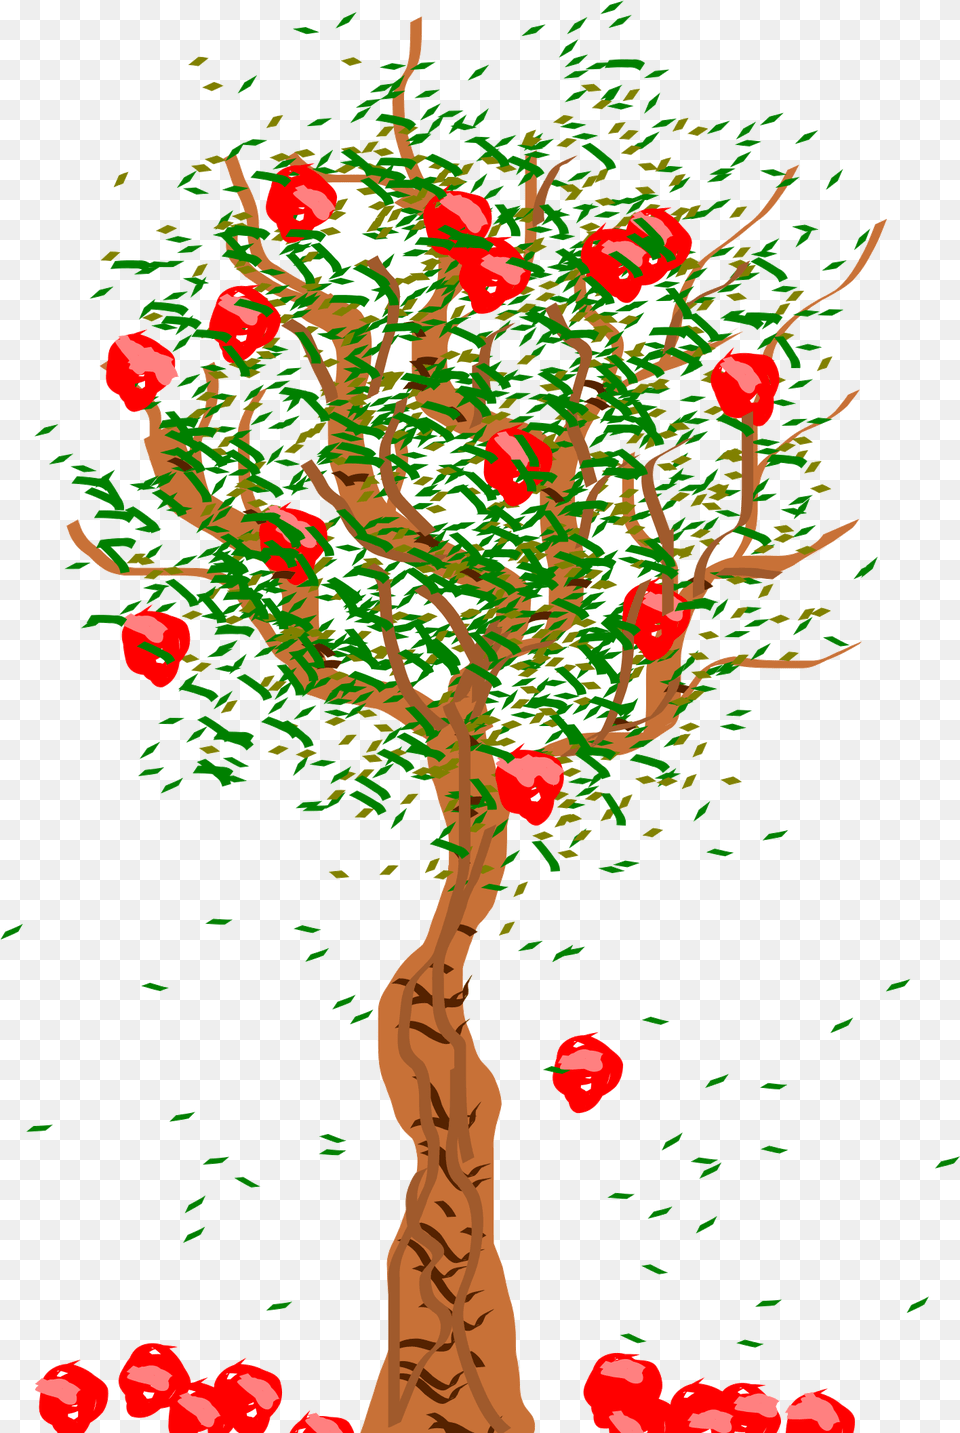 Apple Tree Trees Vector Huge Freebie For Powerpoint Fruit Falling From Tree, Graphics, Art, Painting, Plant Png Image